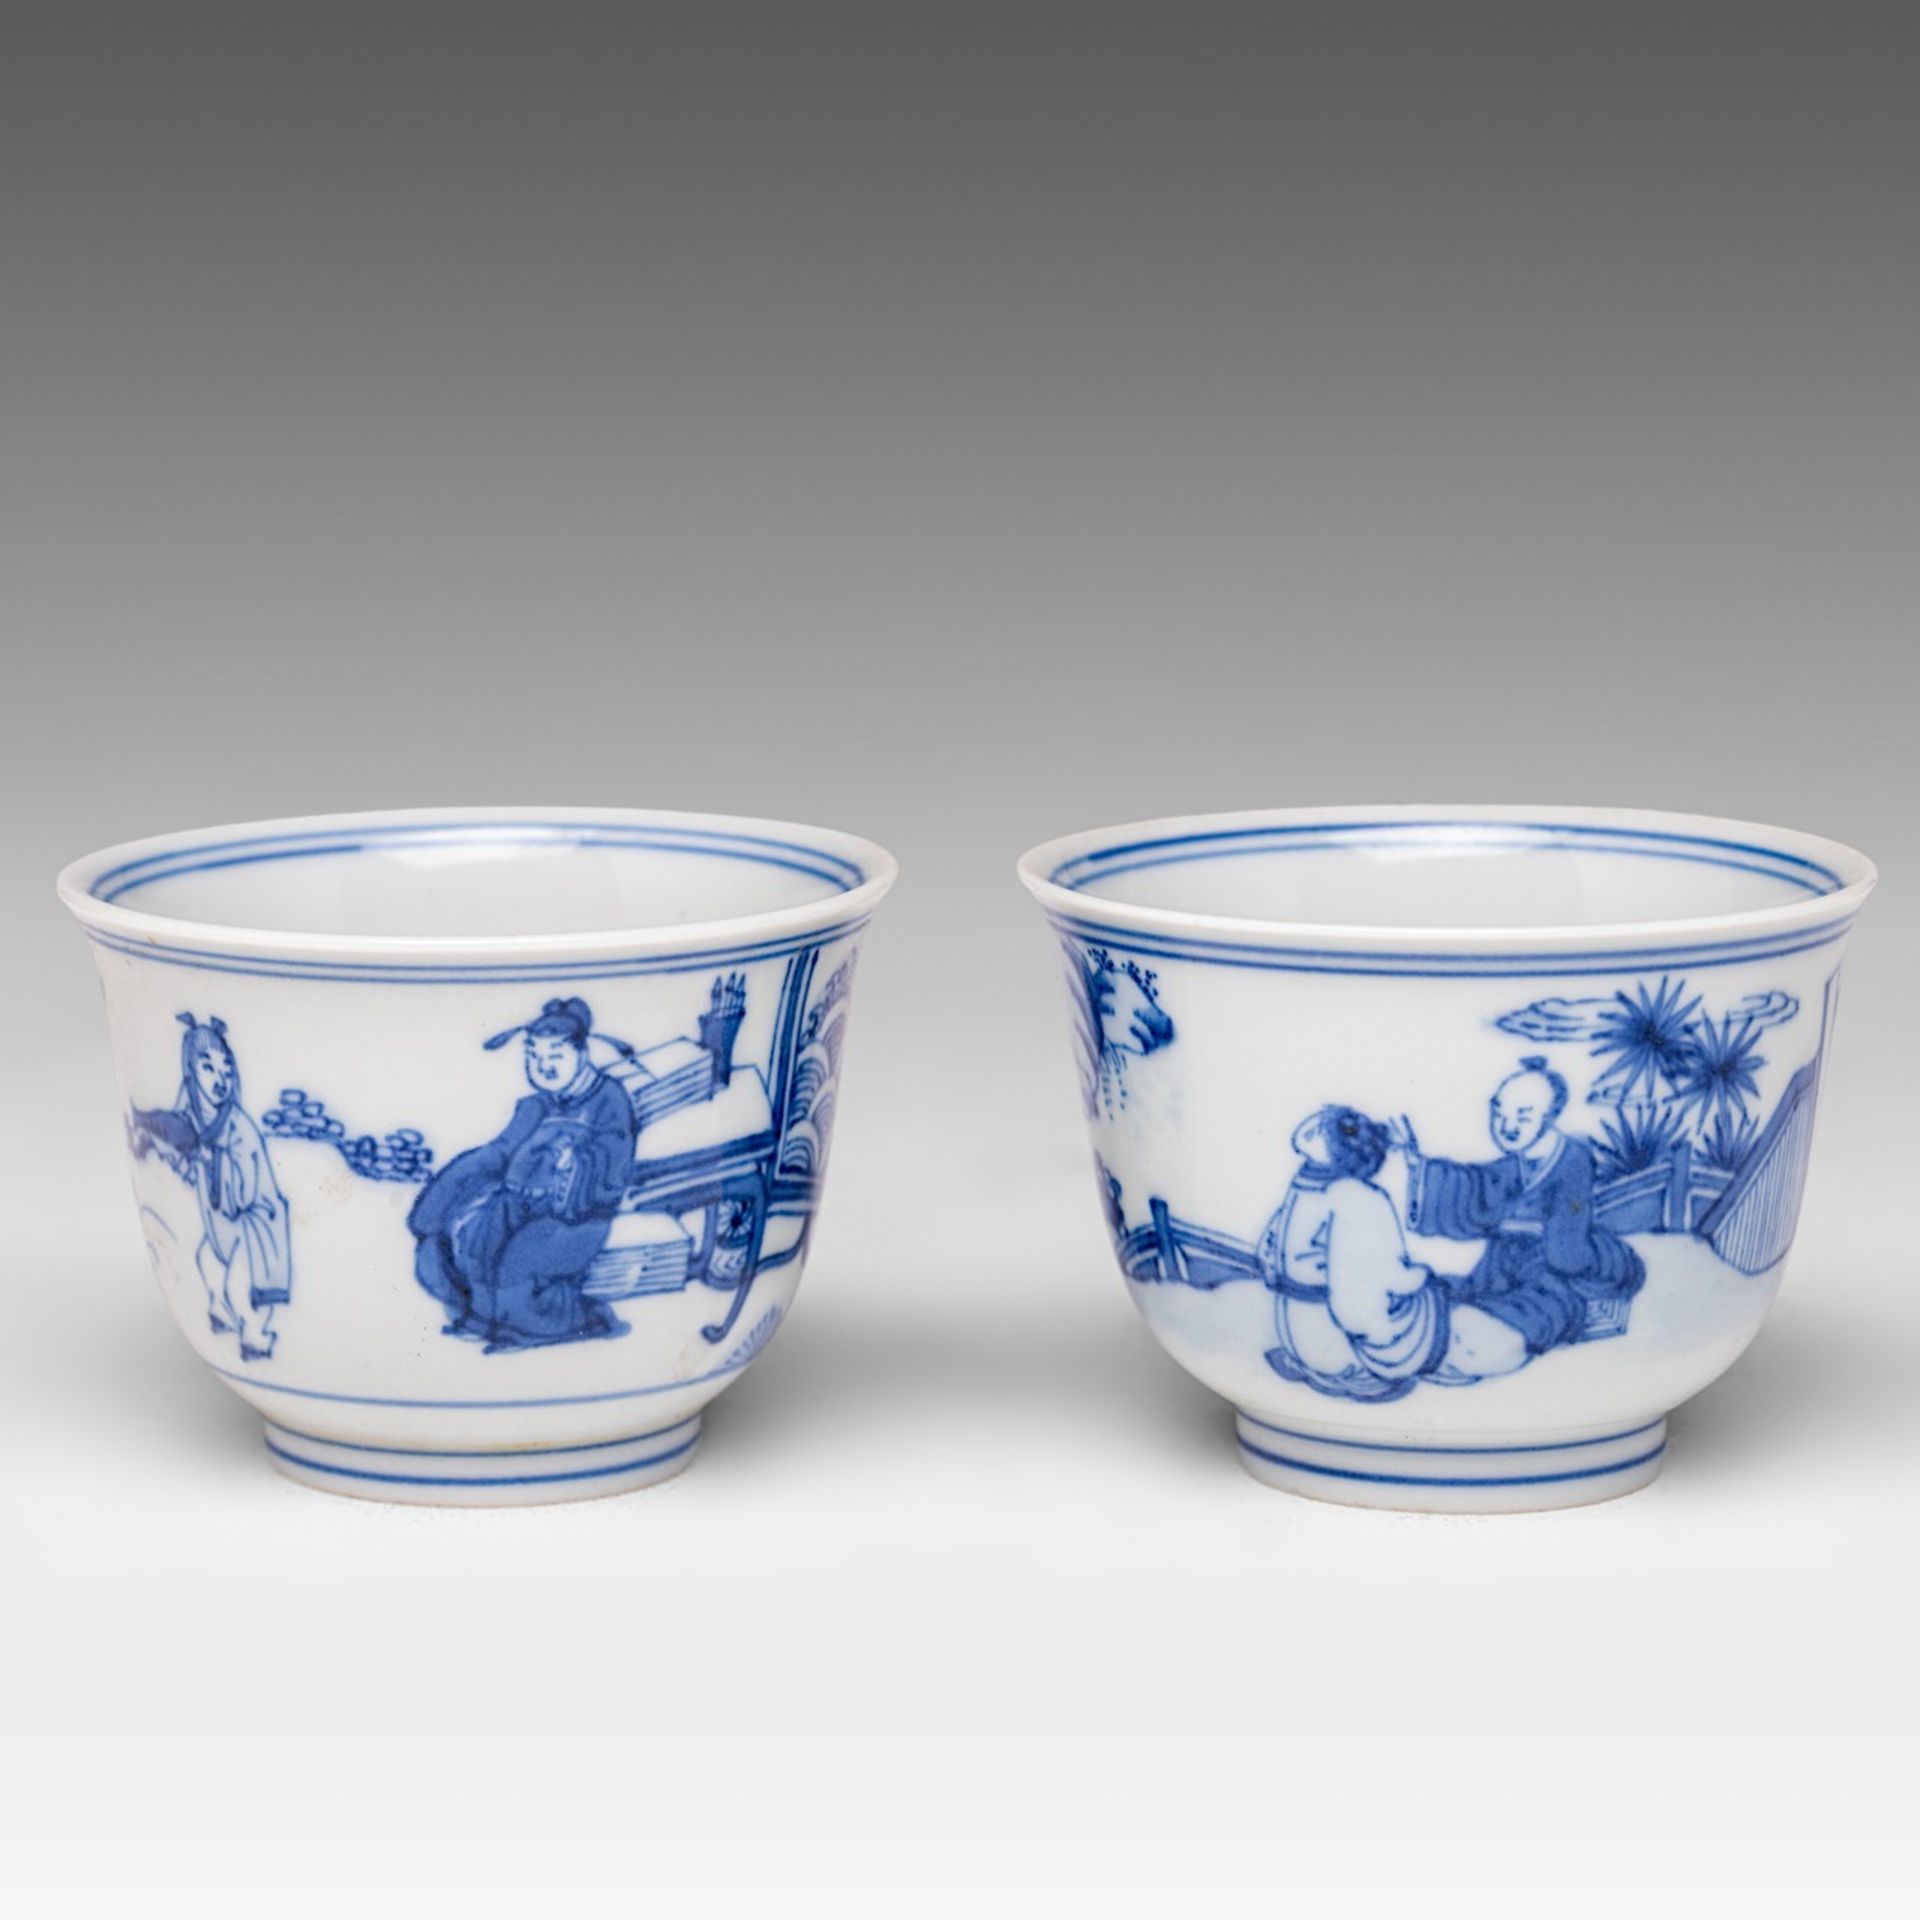 Two Chinese Kangxi style blue and white 'Figural' tea cups, H 6 - dia 8,2 cm